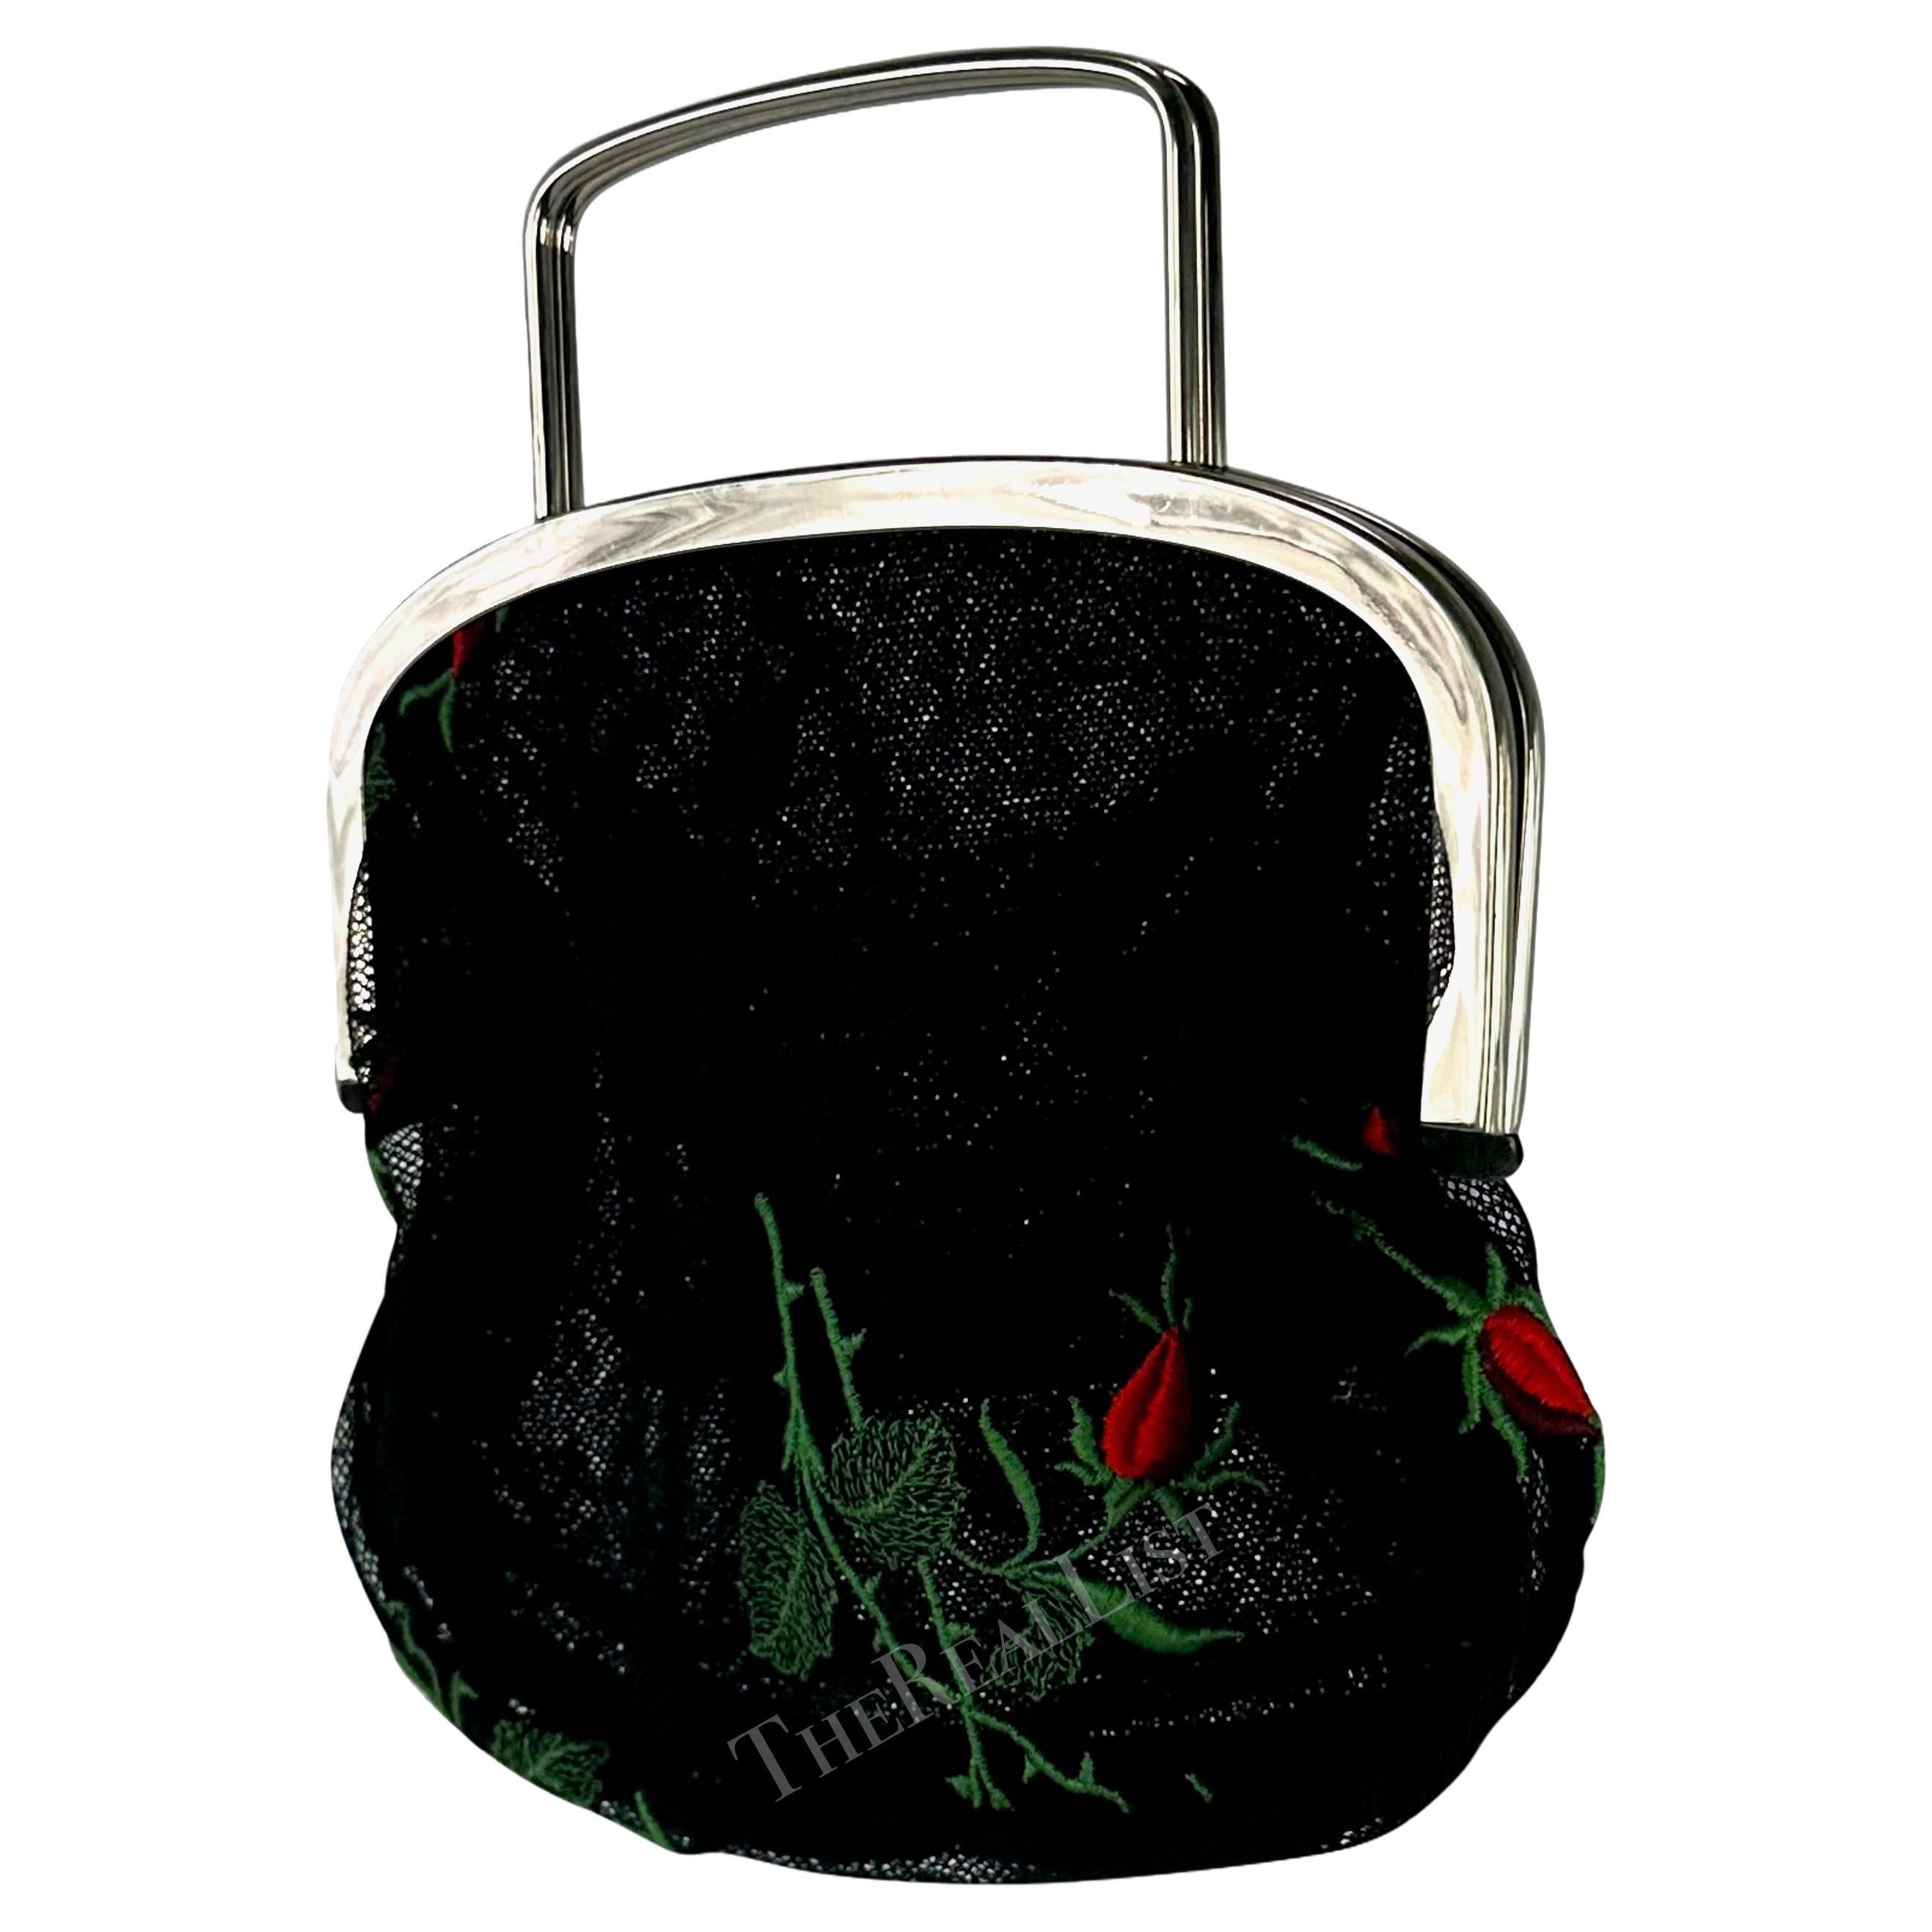 1990s Dolce & Gabbana Black Mesh Red Embroidered Floral Mini Evening Bag For Sale 2